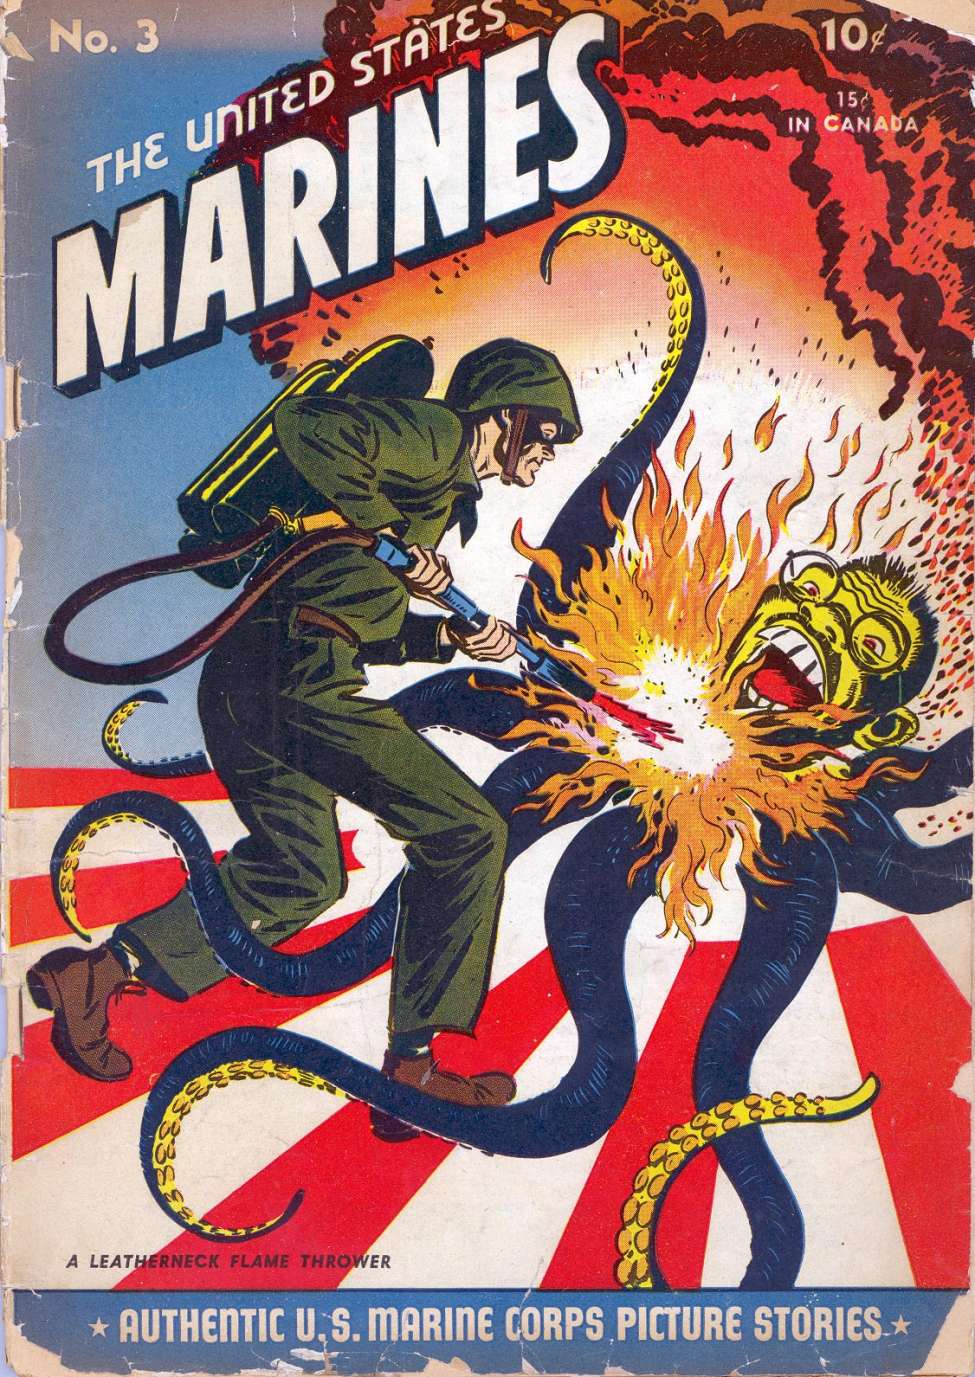 Book Cover For The United States Marines 3 - Version 1